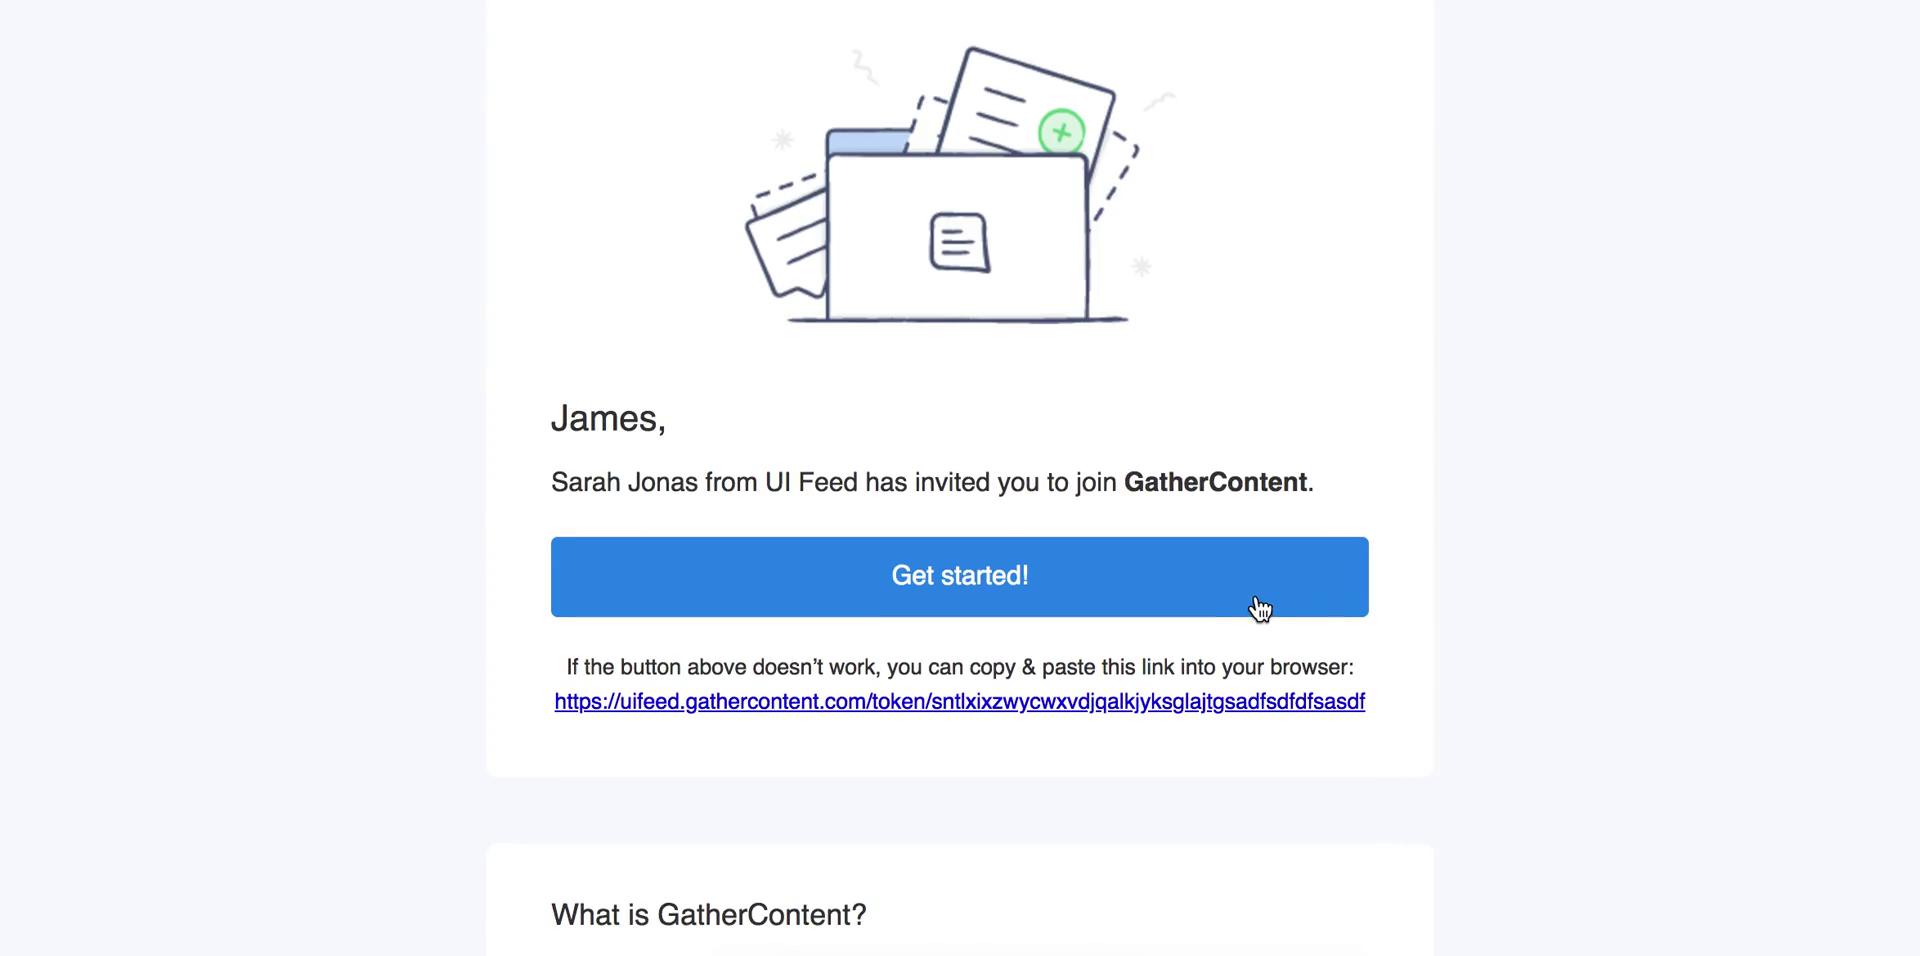 Accepting an invite on GatherContent video screenshot